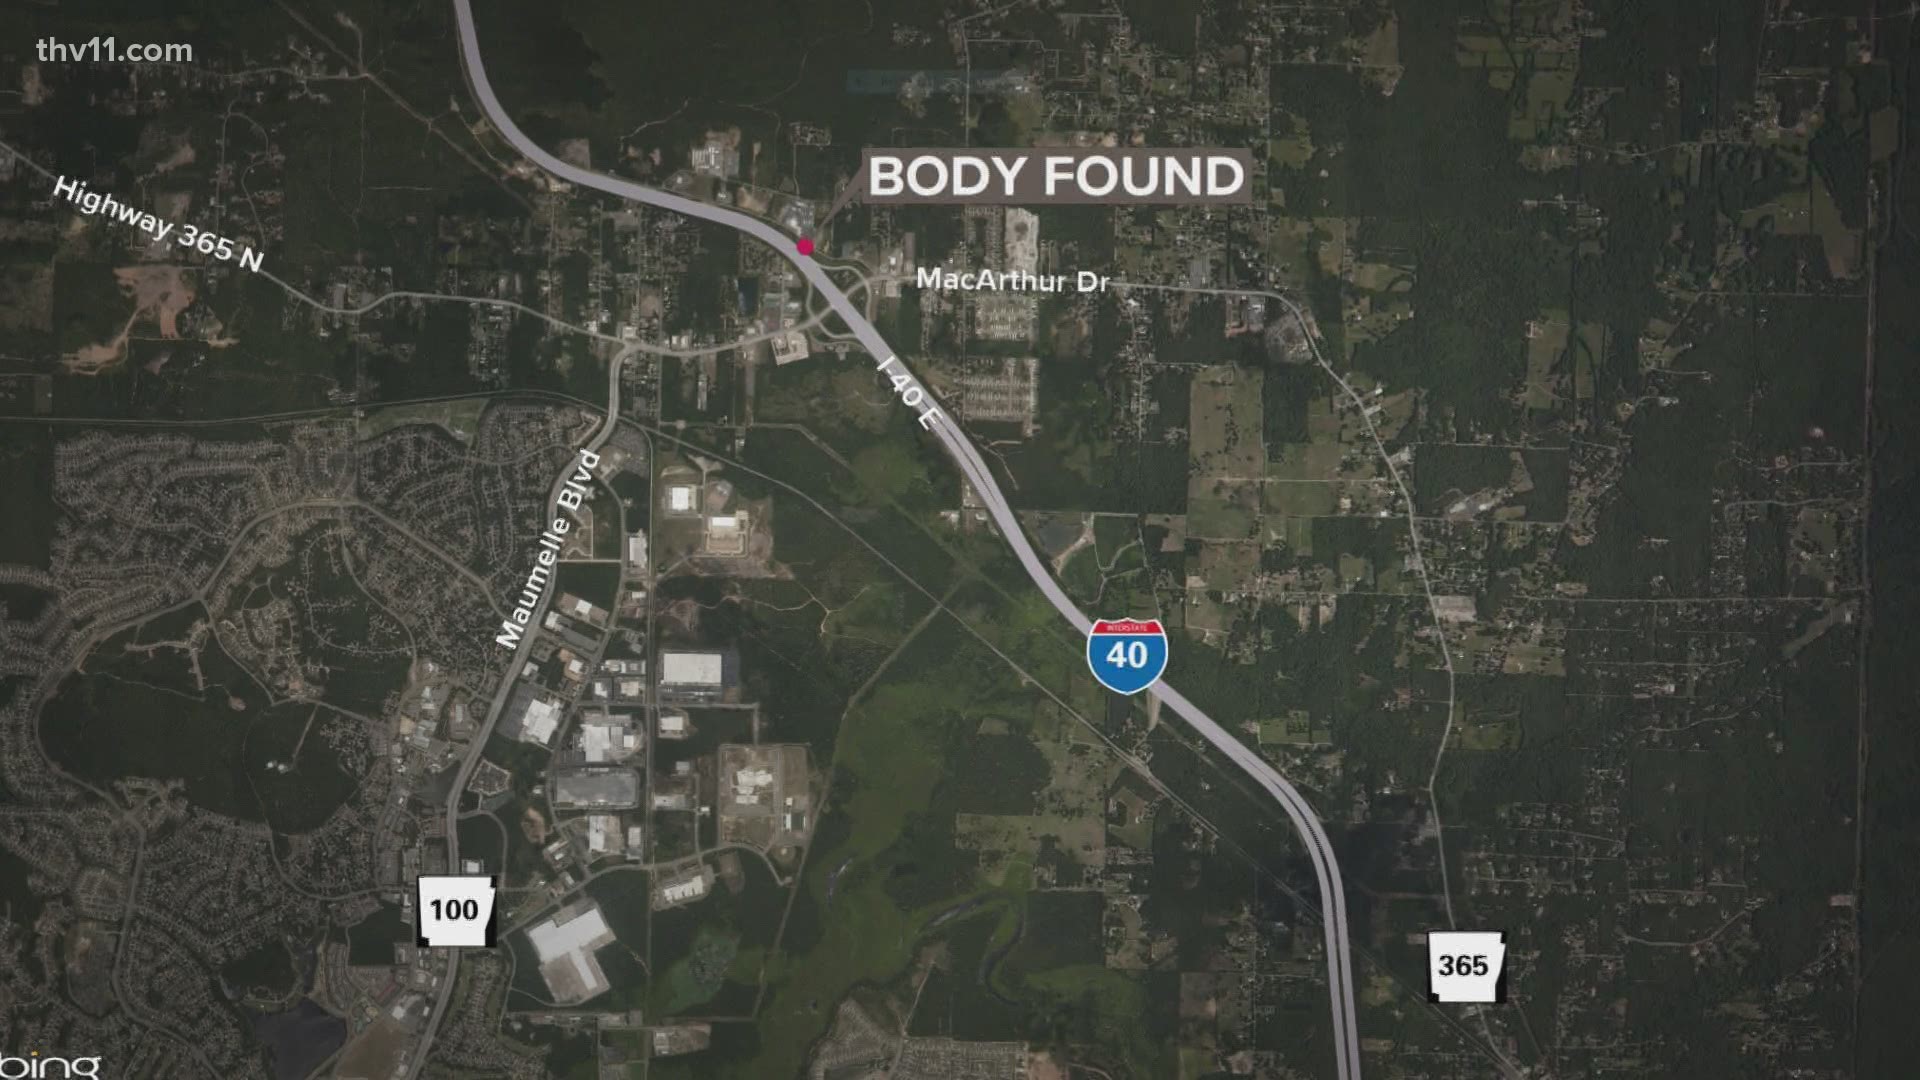 Police say a body was found Friday near the Morgan/Maumelle exit on I-40.